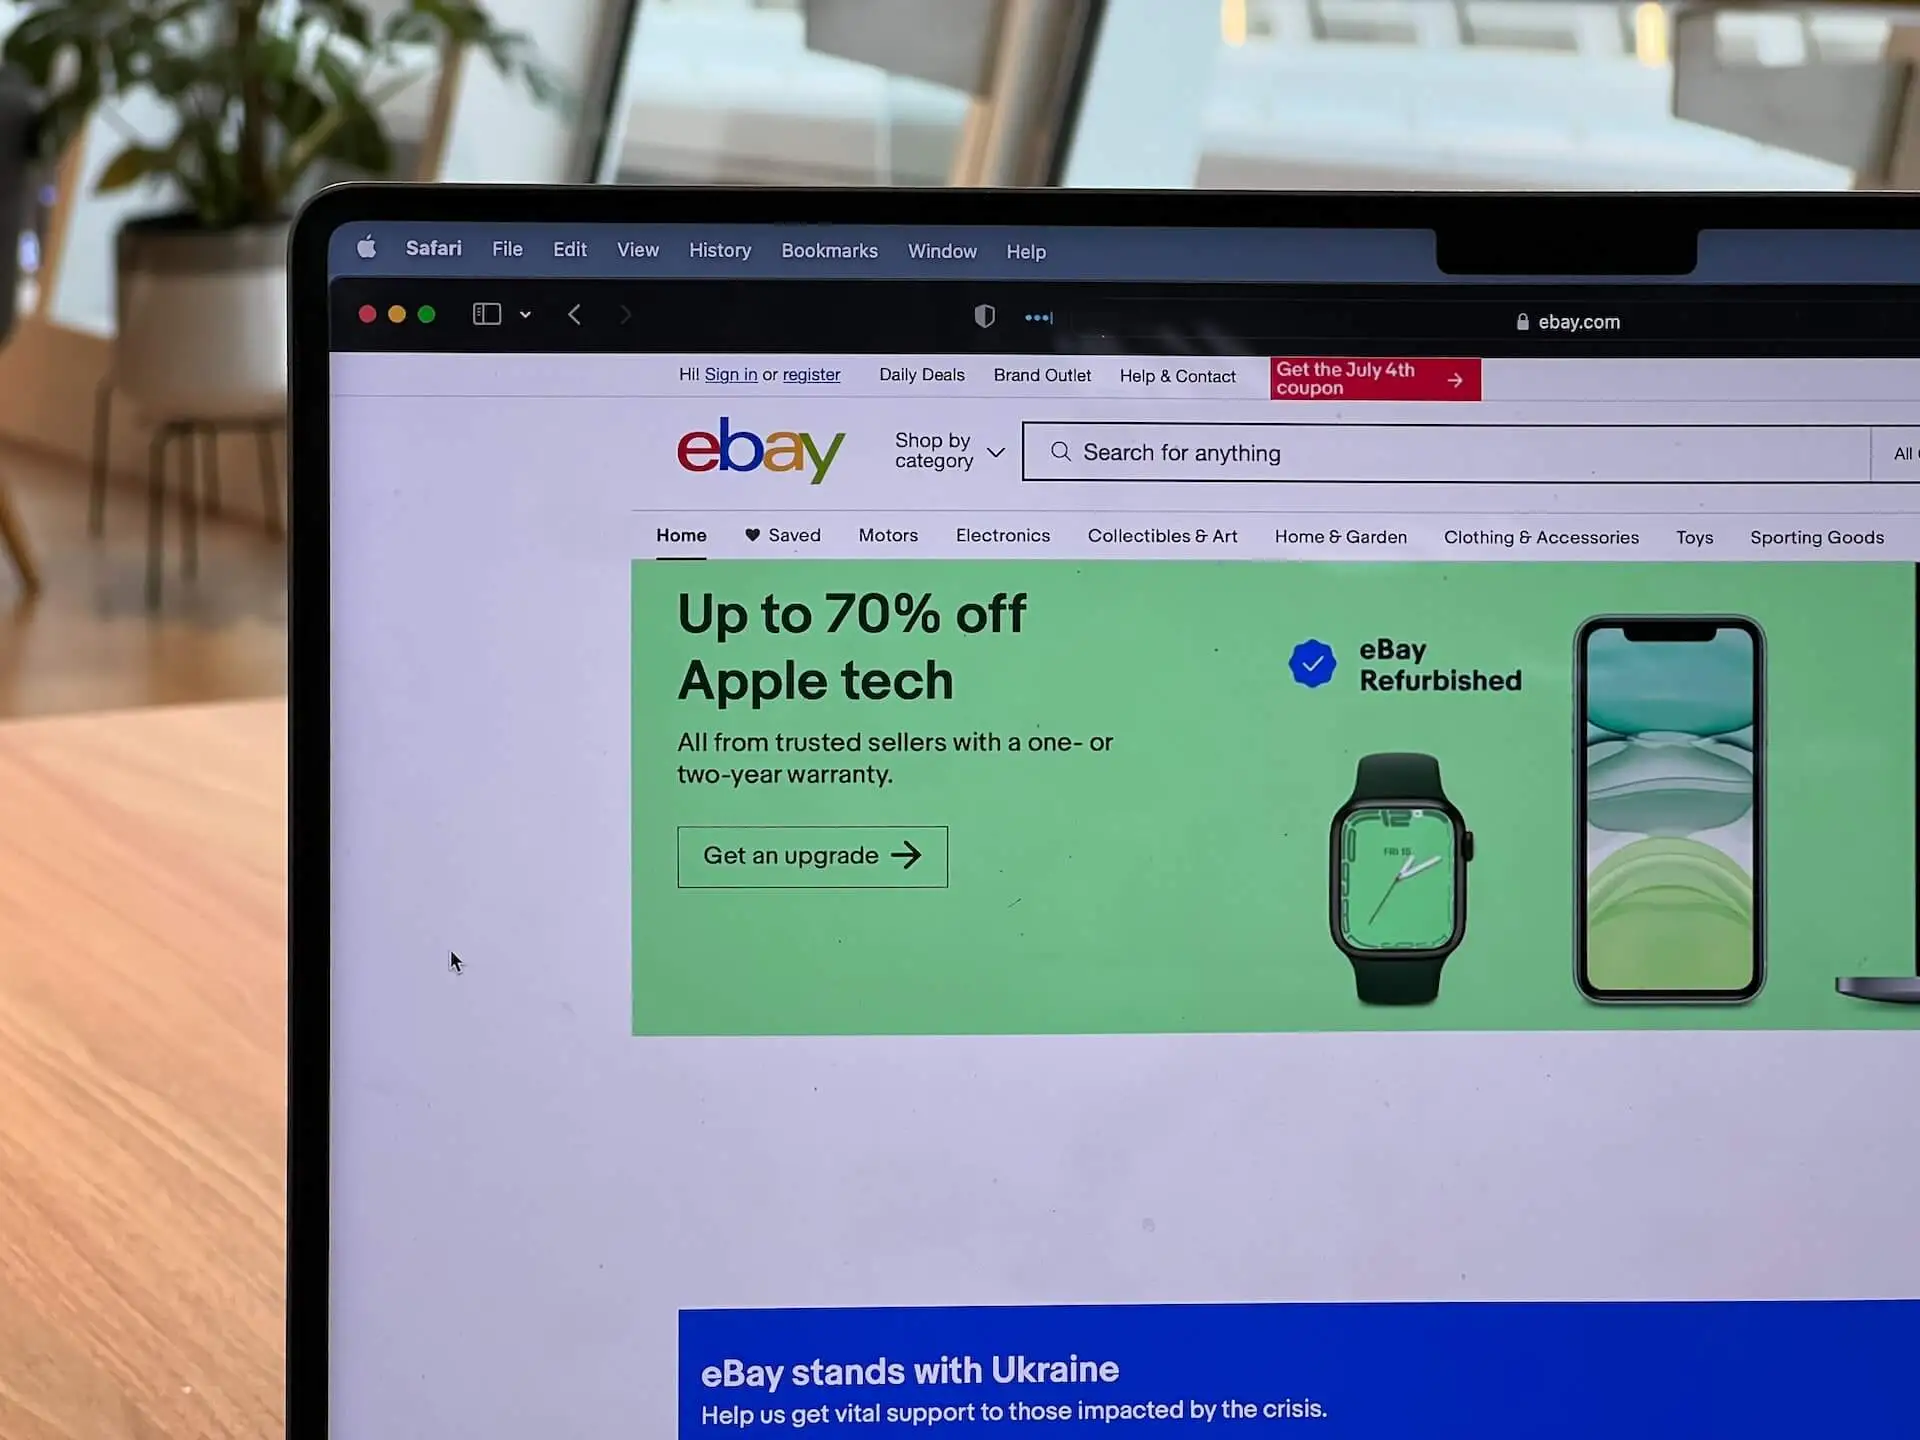 Do you Need a Business License to Sell on eBay?